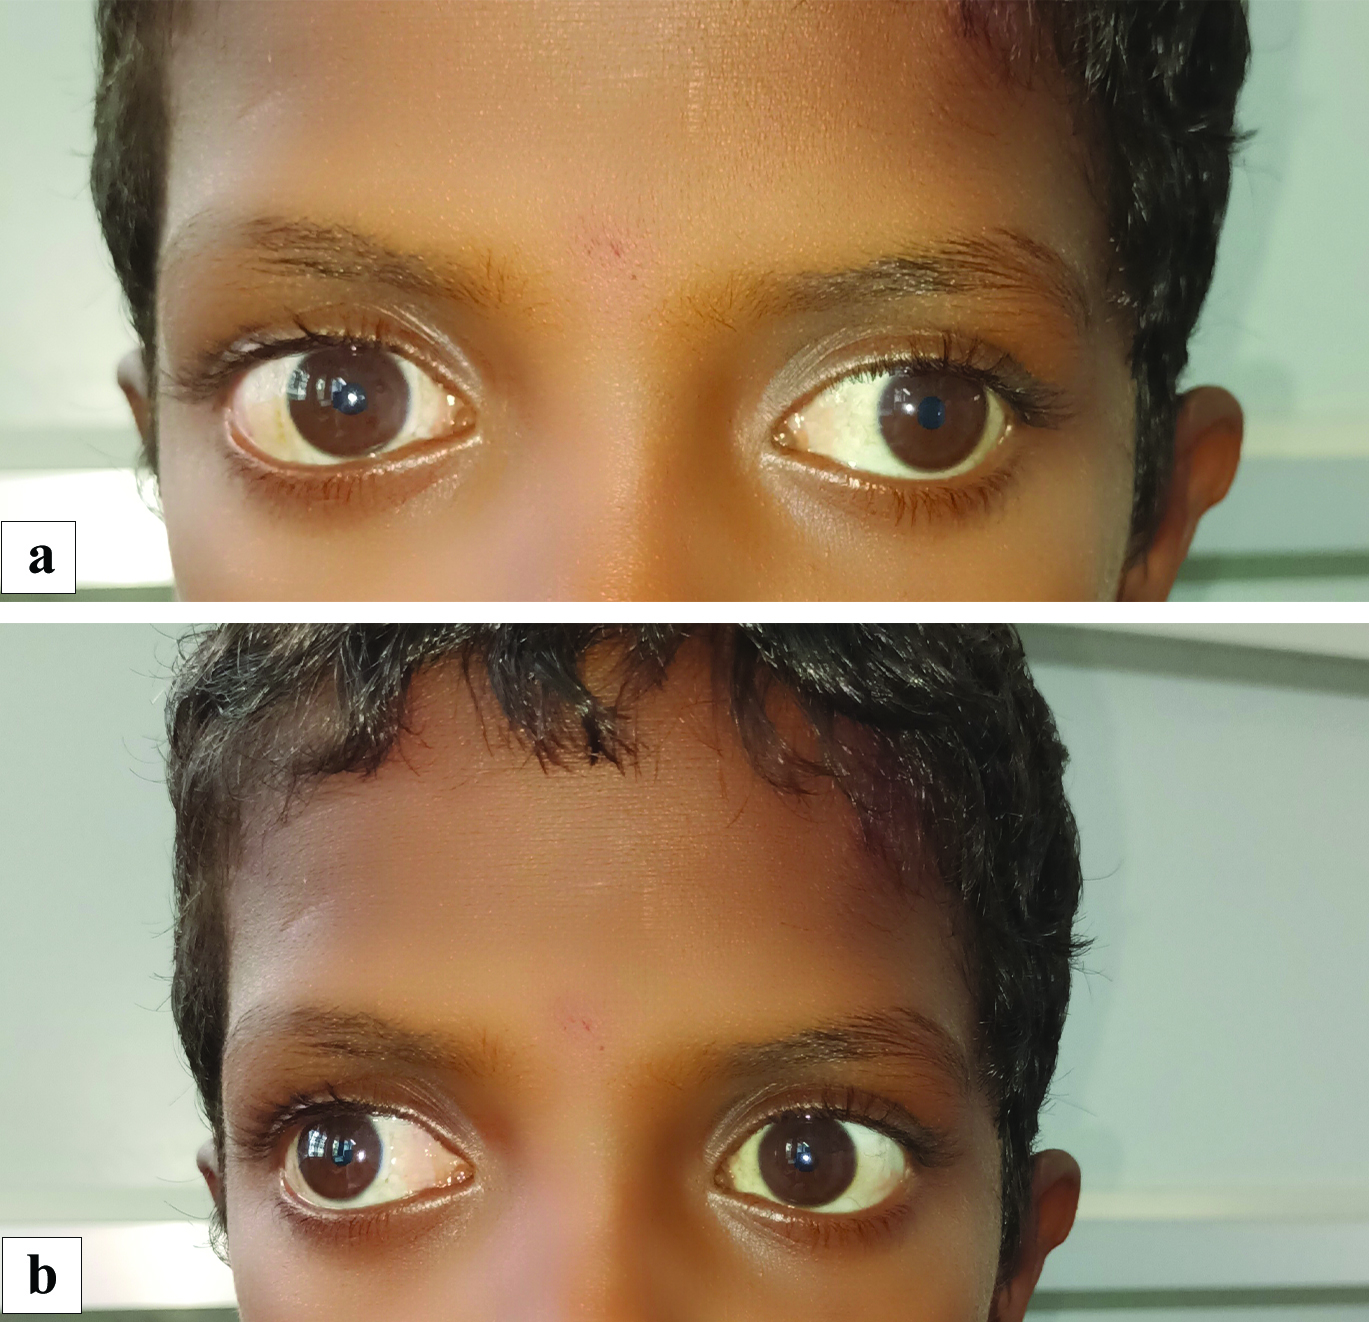 (a) Image of the child depicting 30 degrees exotropia in the left eye while fixating with right eye in primary gaze. (b) Image of the child depicting 30 degrees exotropia with minimal 5 degree hypertropia of the right eye while fixating with left eye in primary gaze suggestive of an alternate exotropia with right eye dissociated vertical deviation